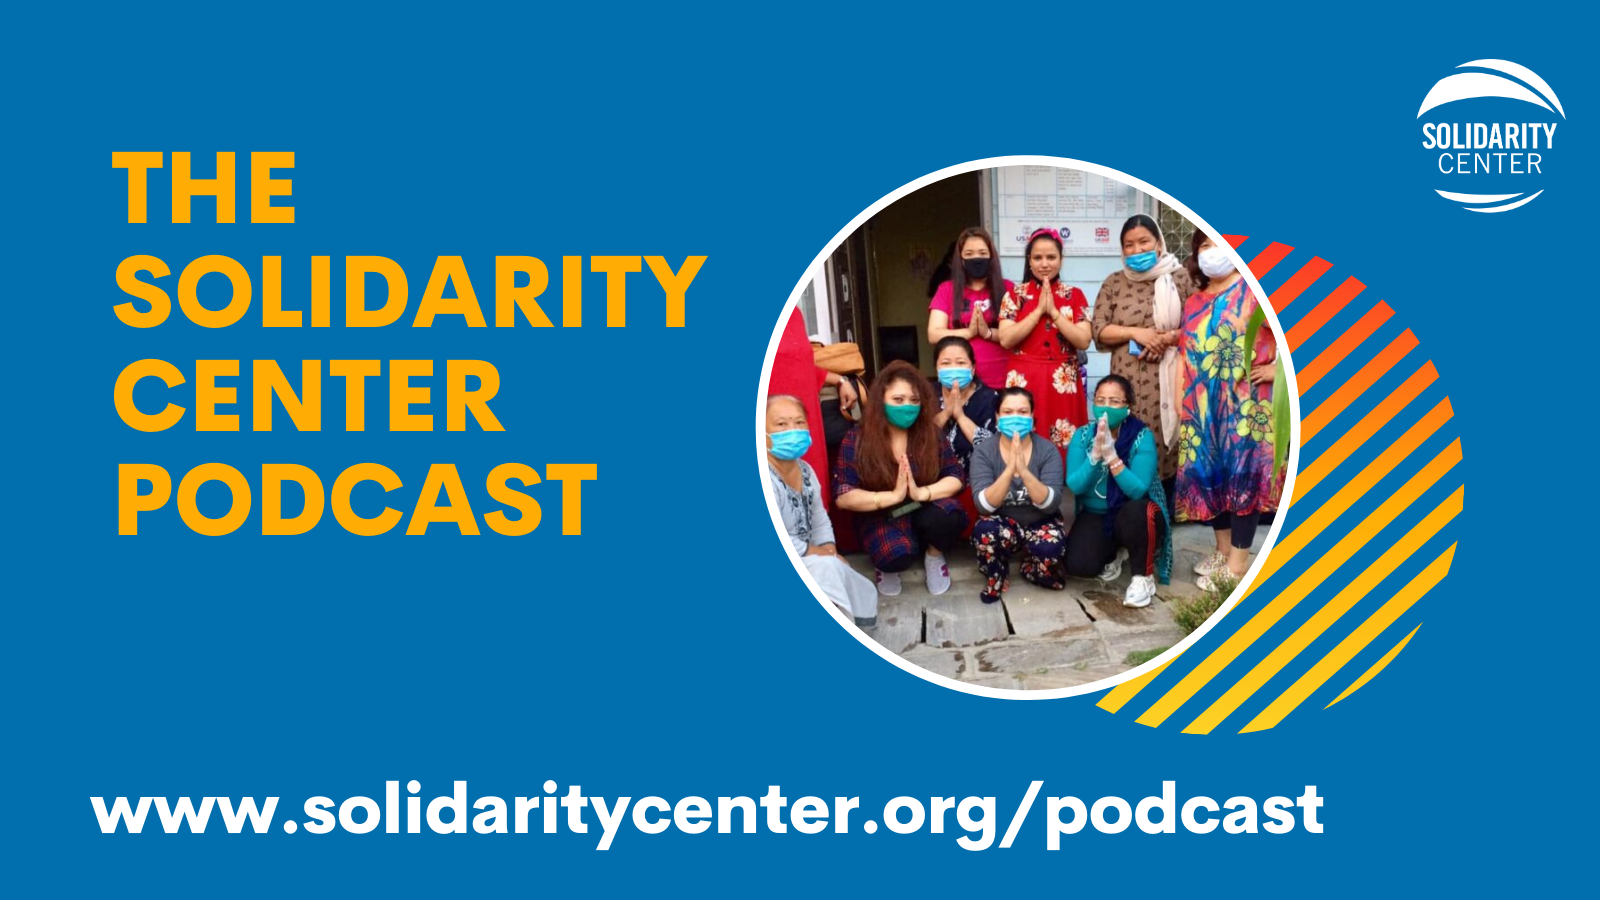 Podcast: Winning Rights for Migrant Workers During COVID-19